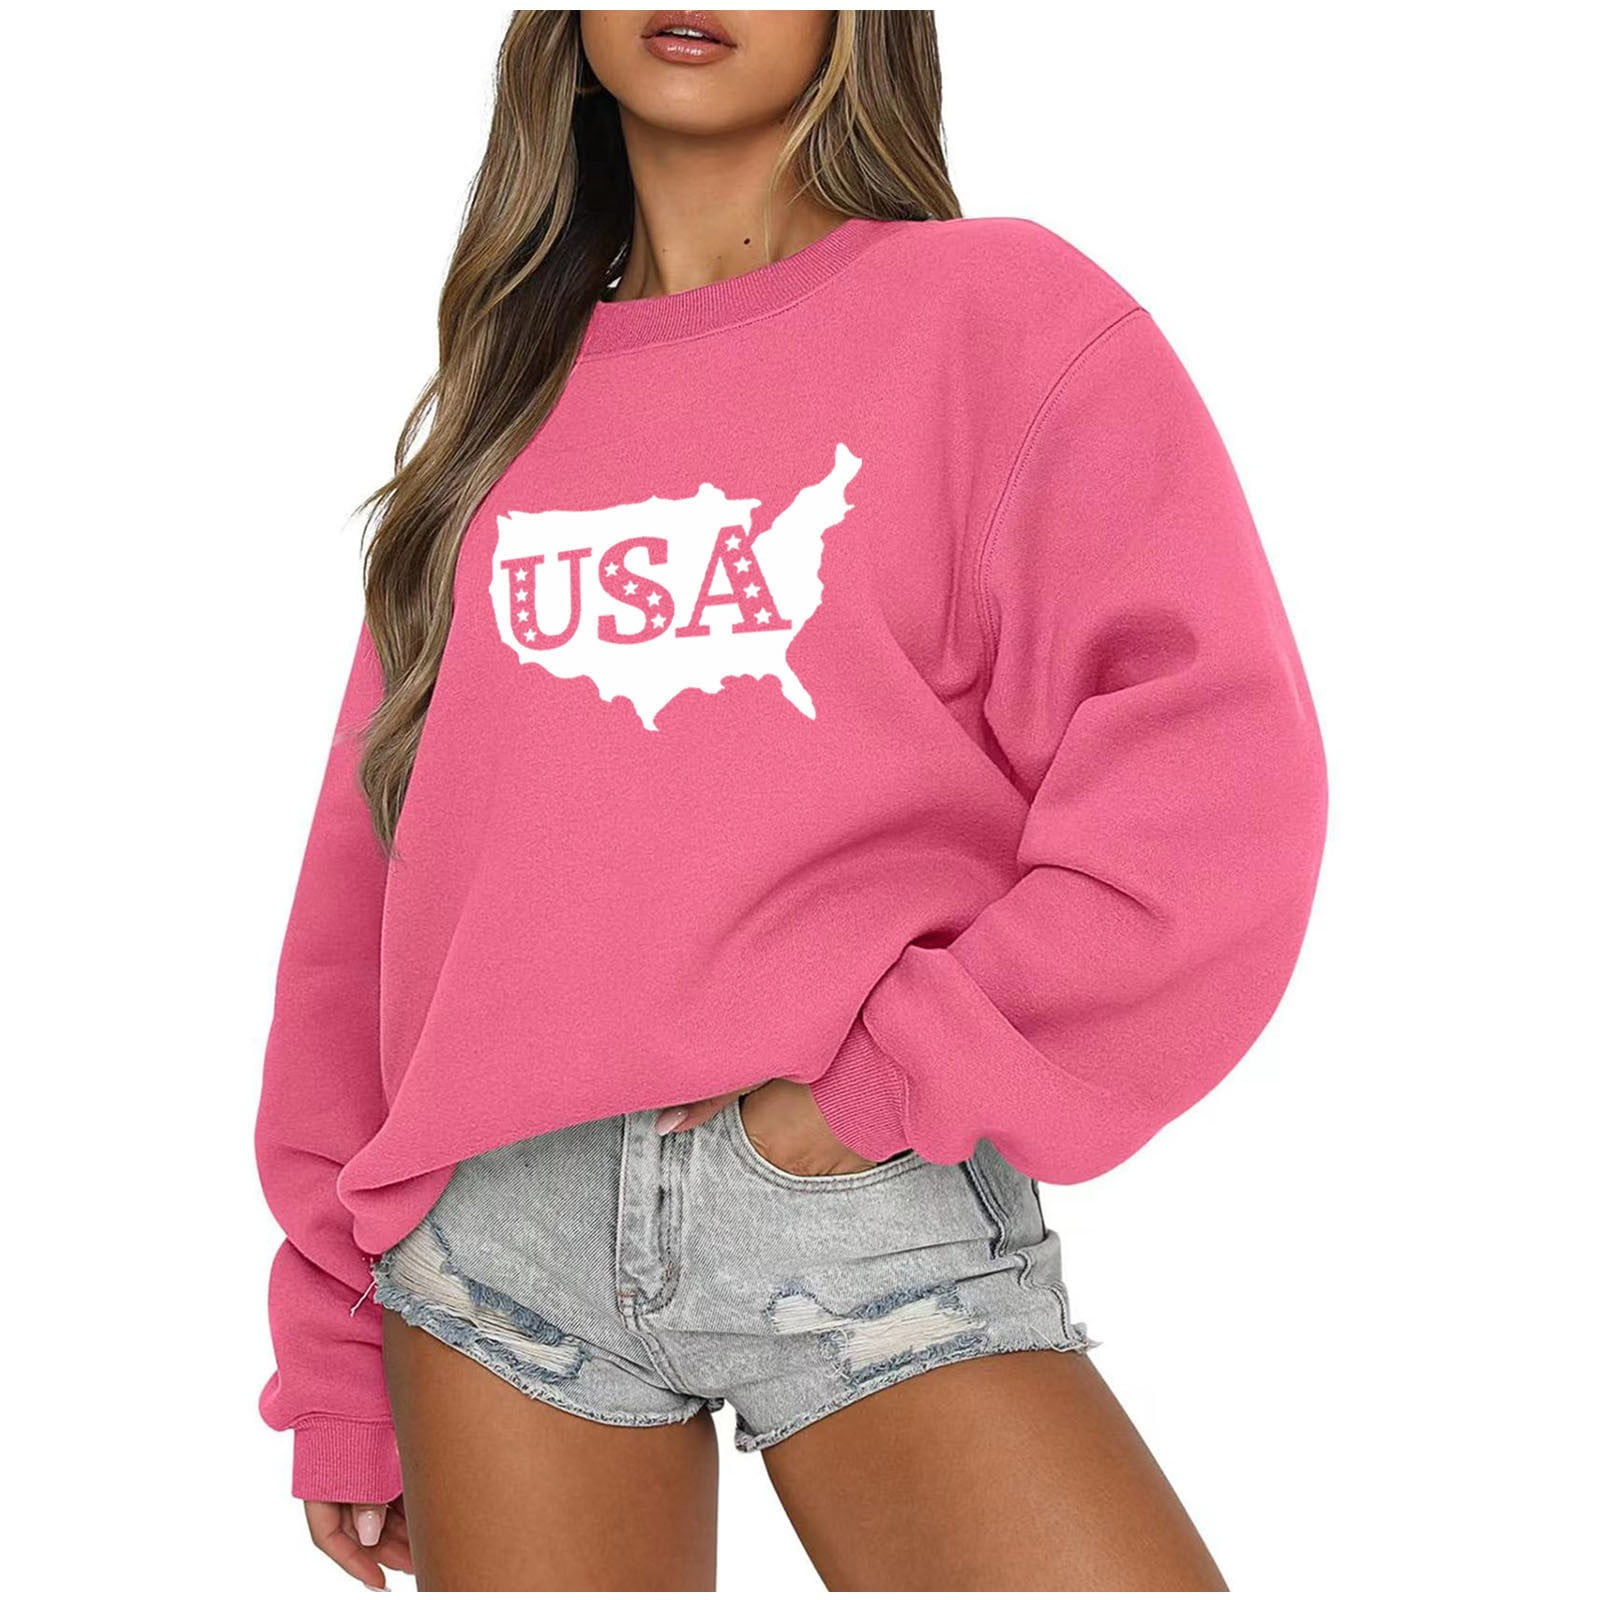 JGGSPWM Womens USA Graphic Sweatshirts Teen Girl Clothes Casual Tops  Lightweight Long Sleeve Oversized Sweatshirt for Women Pullover Pink M